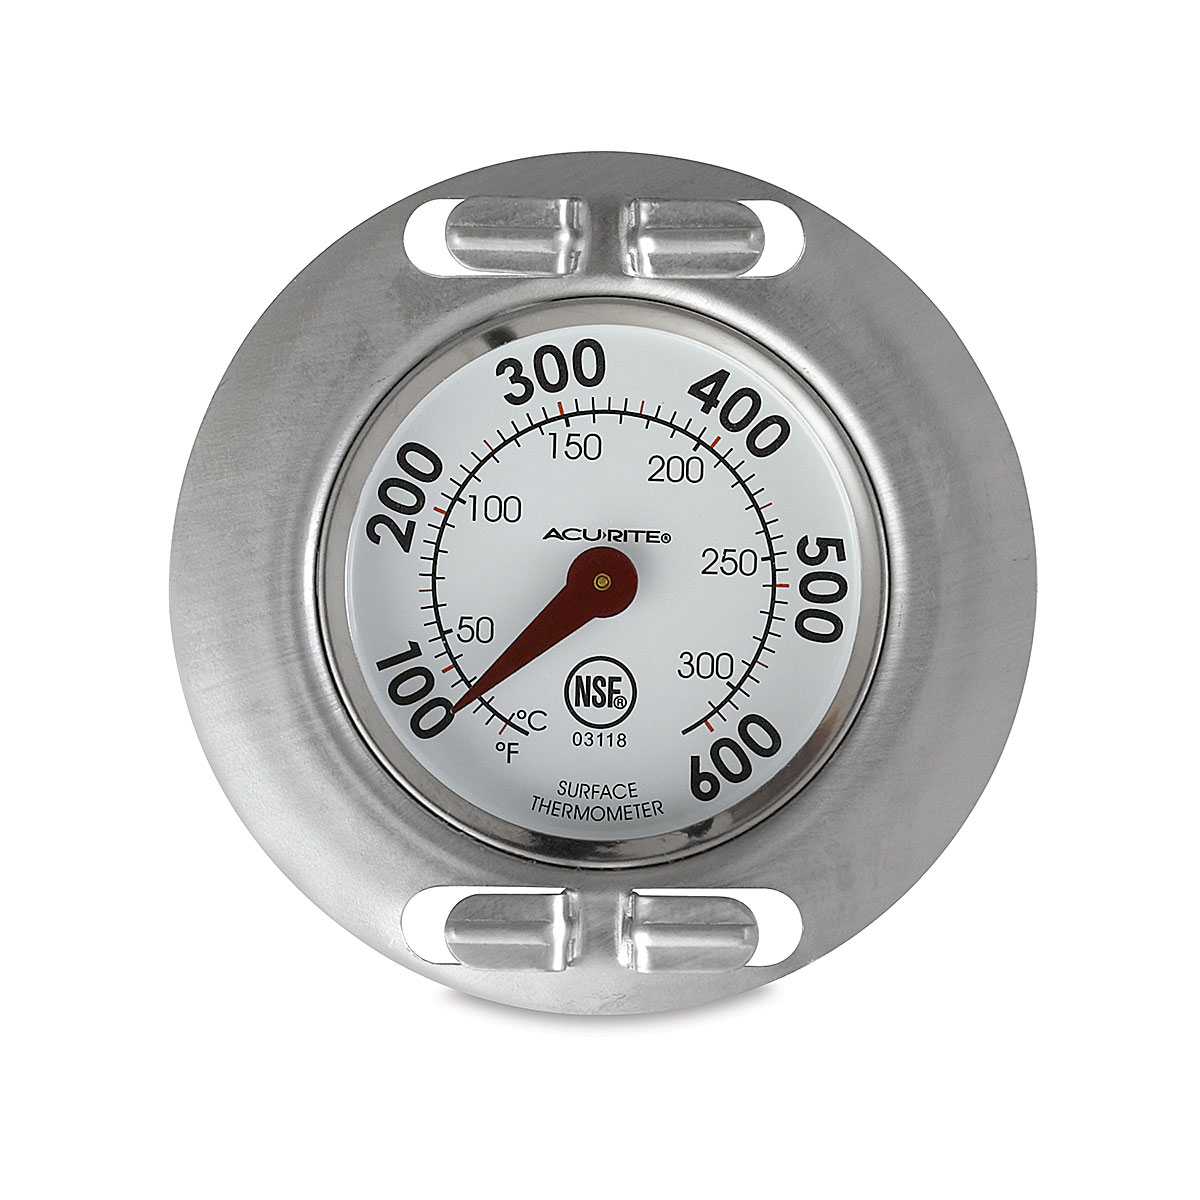 Plastic Ambient Thermometer (REF. 111)